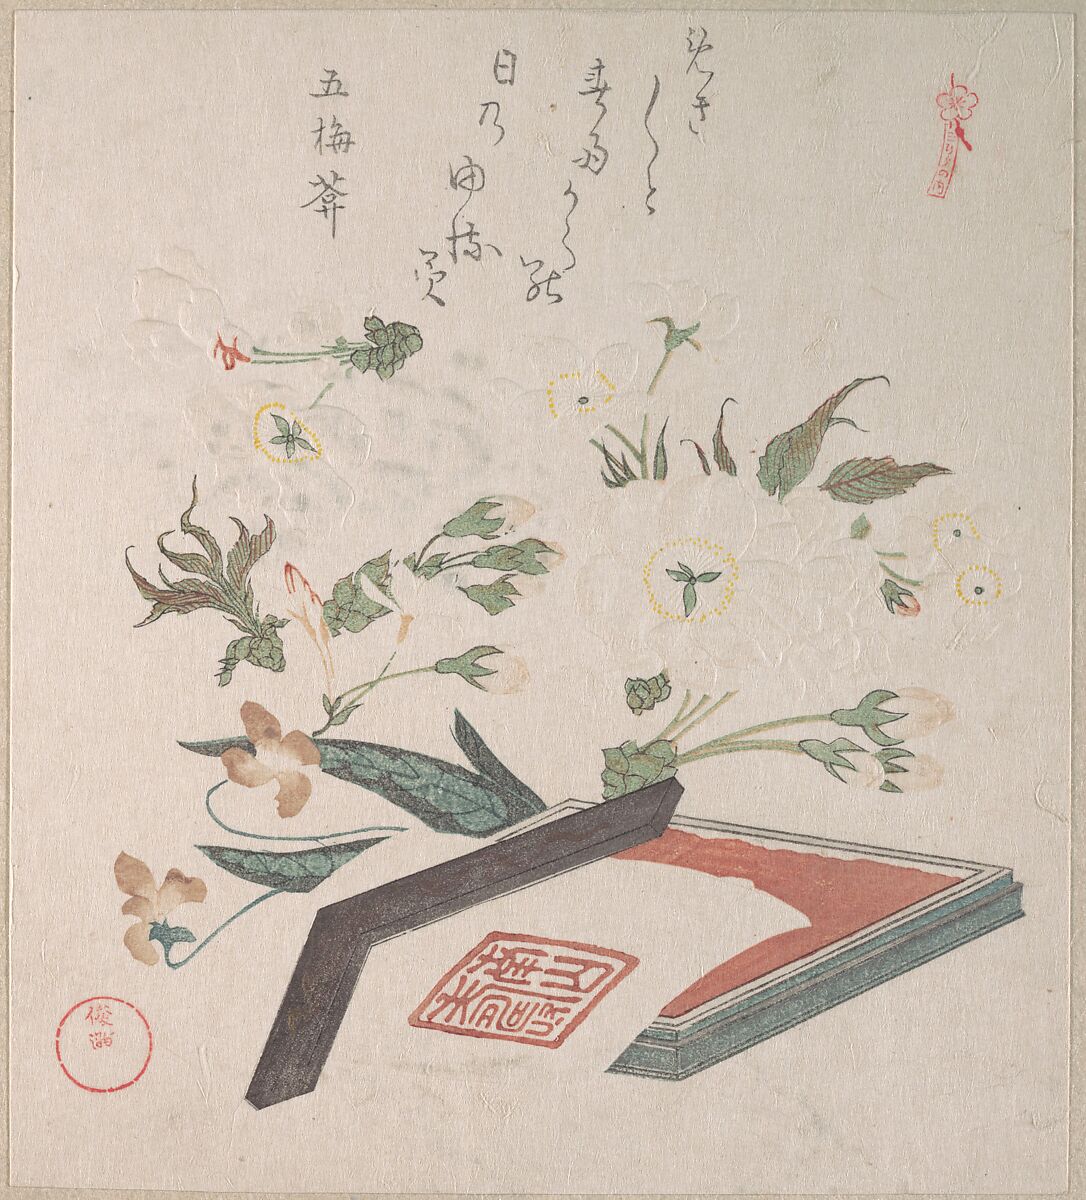 Cherry Blossoms and Seal-box with Ink and Ruler, Kubo Shunman (Japanese, 1757–1820), Part of an album of woodblock prints (surimono); ink and color on paper, Japan 